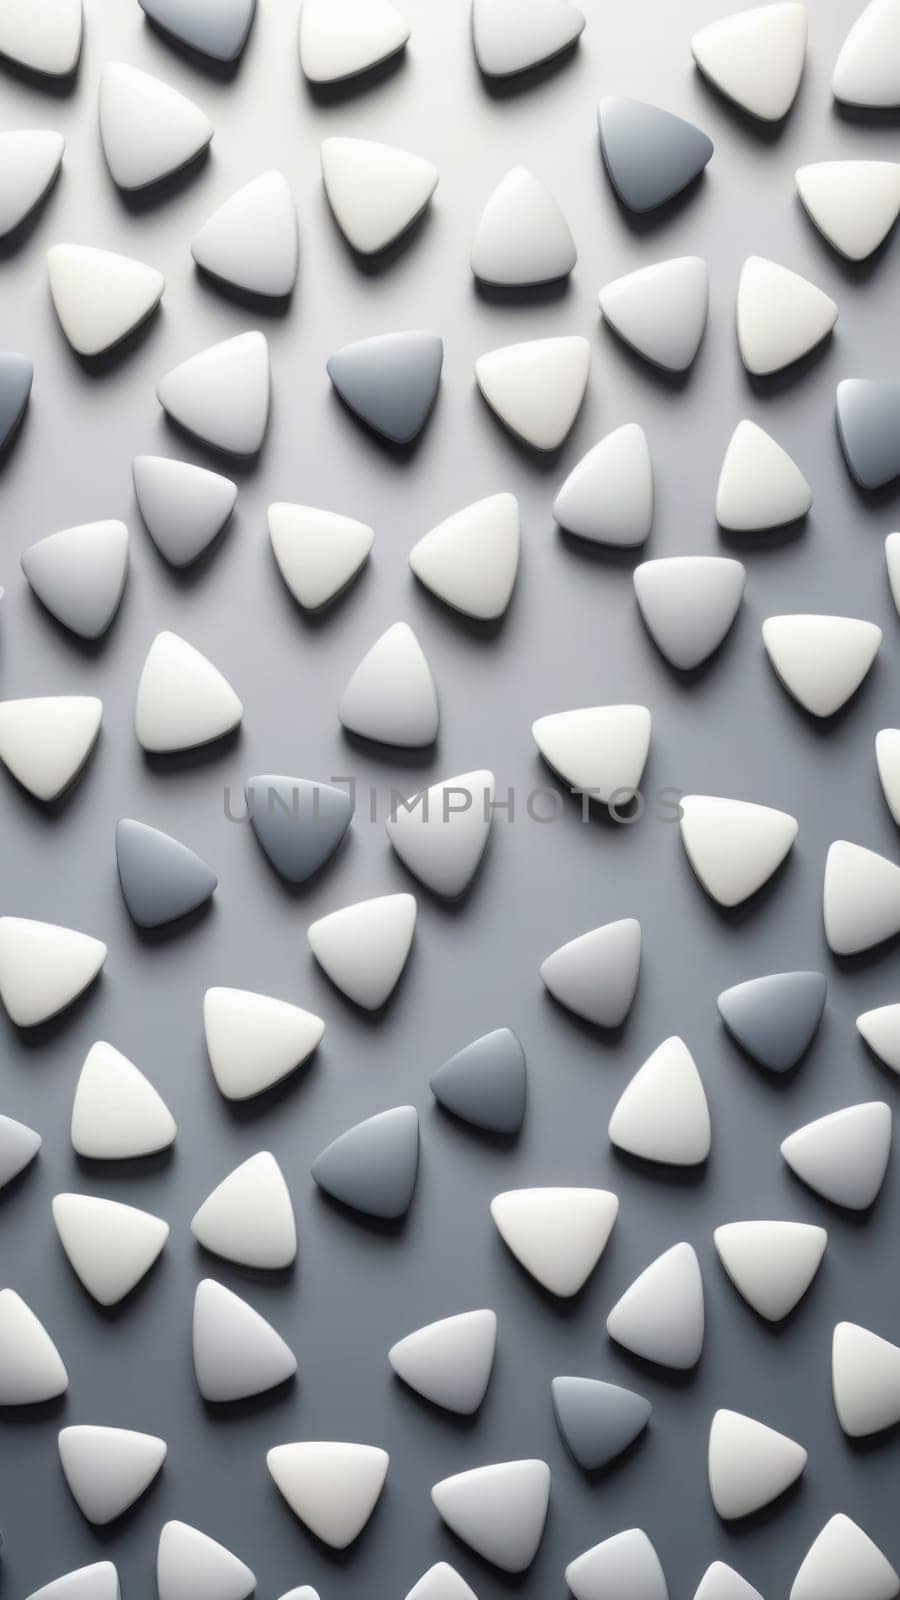 Background from Plectrum shapes and white by nkotlyar